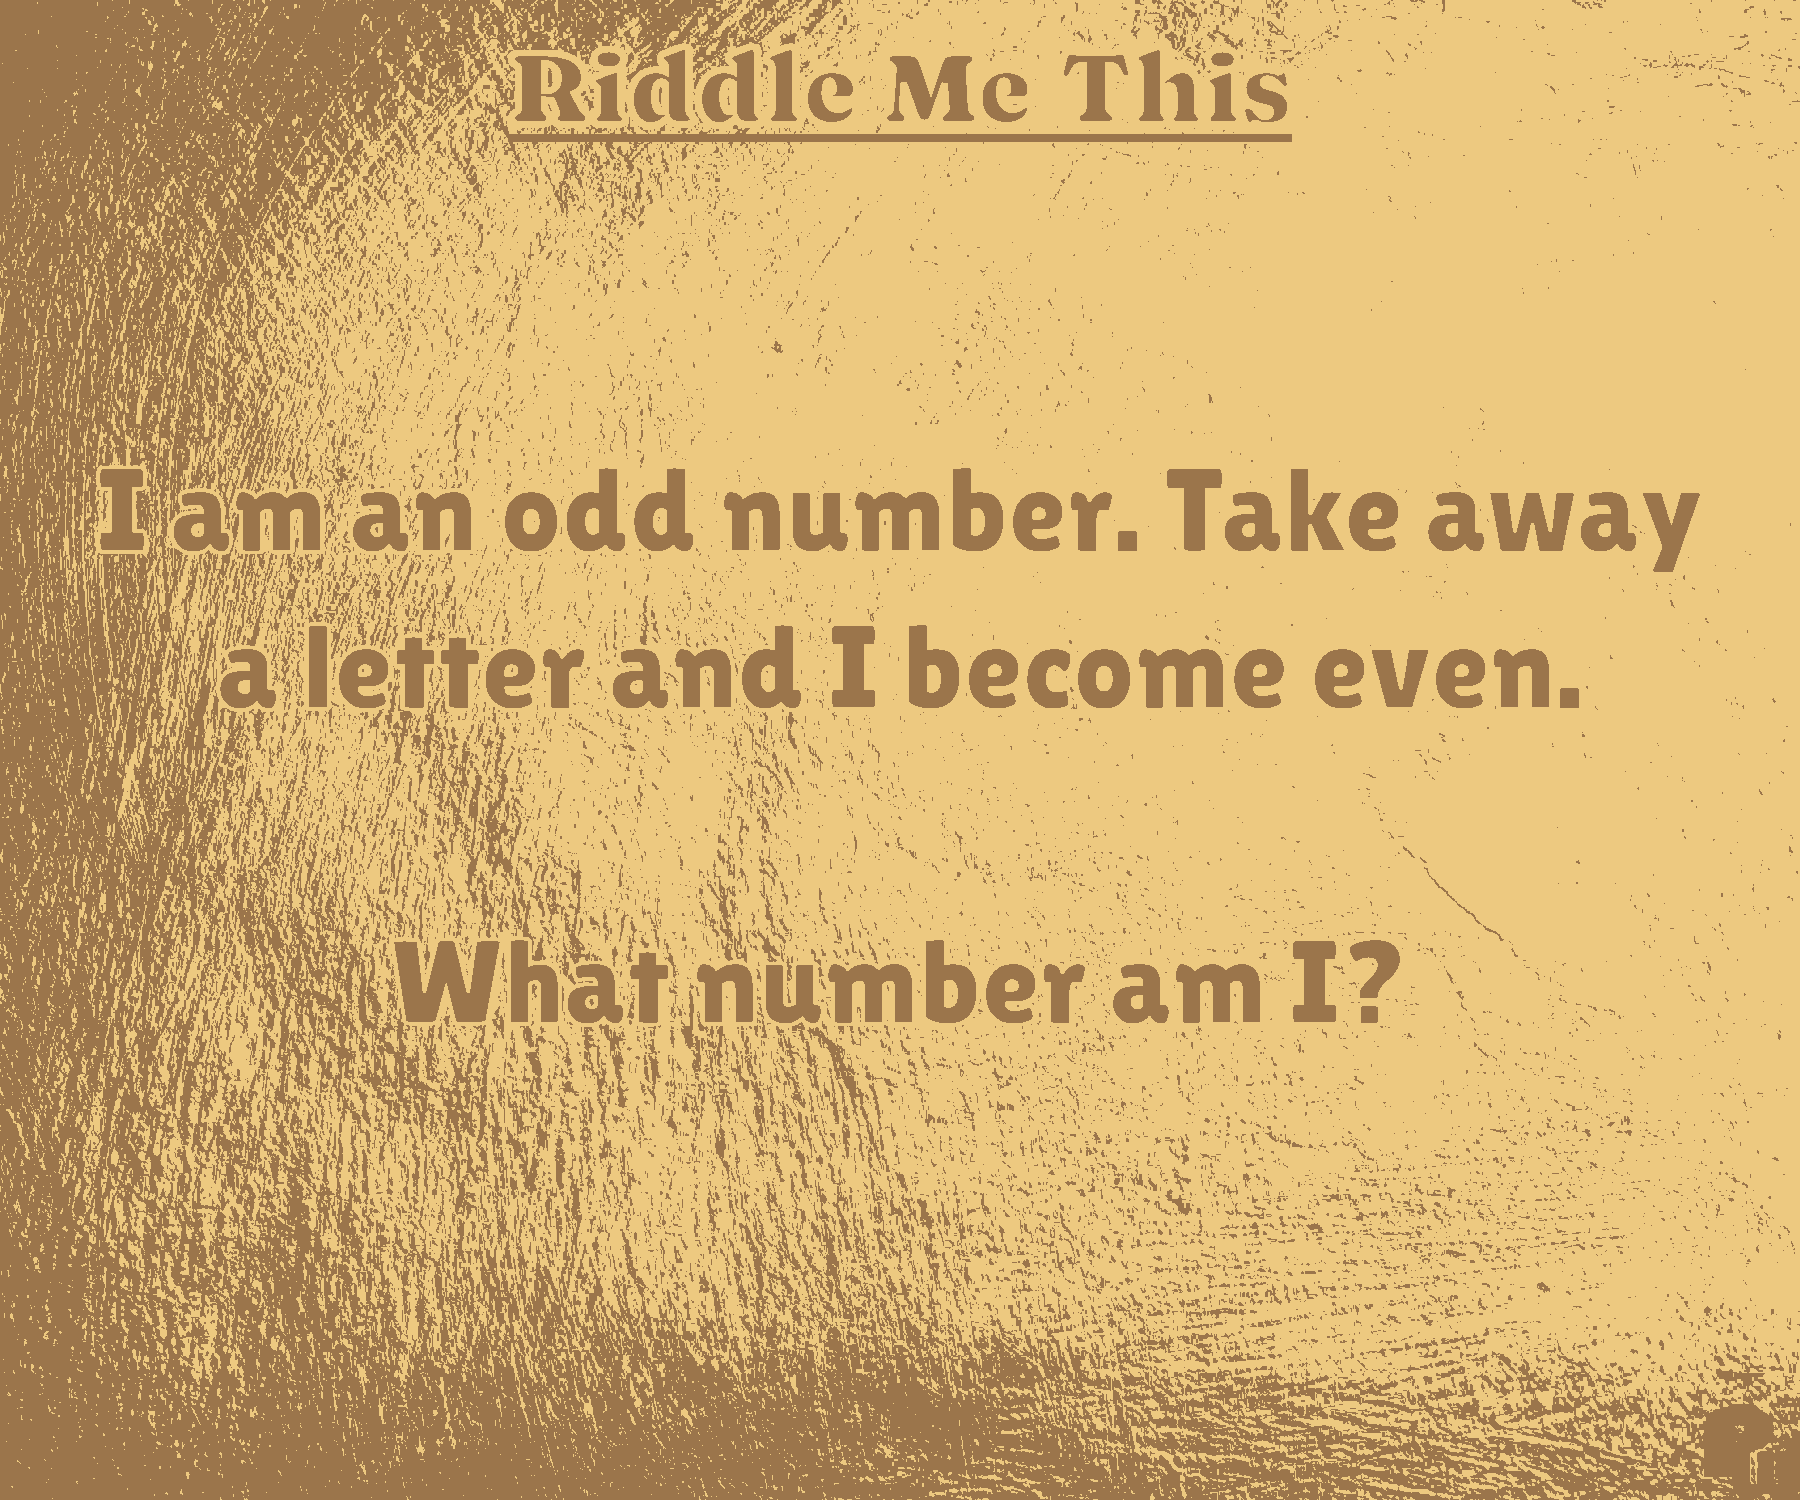 I am an odd number. Take away a letter and I become even.  What number am I?